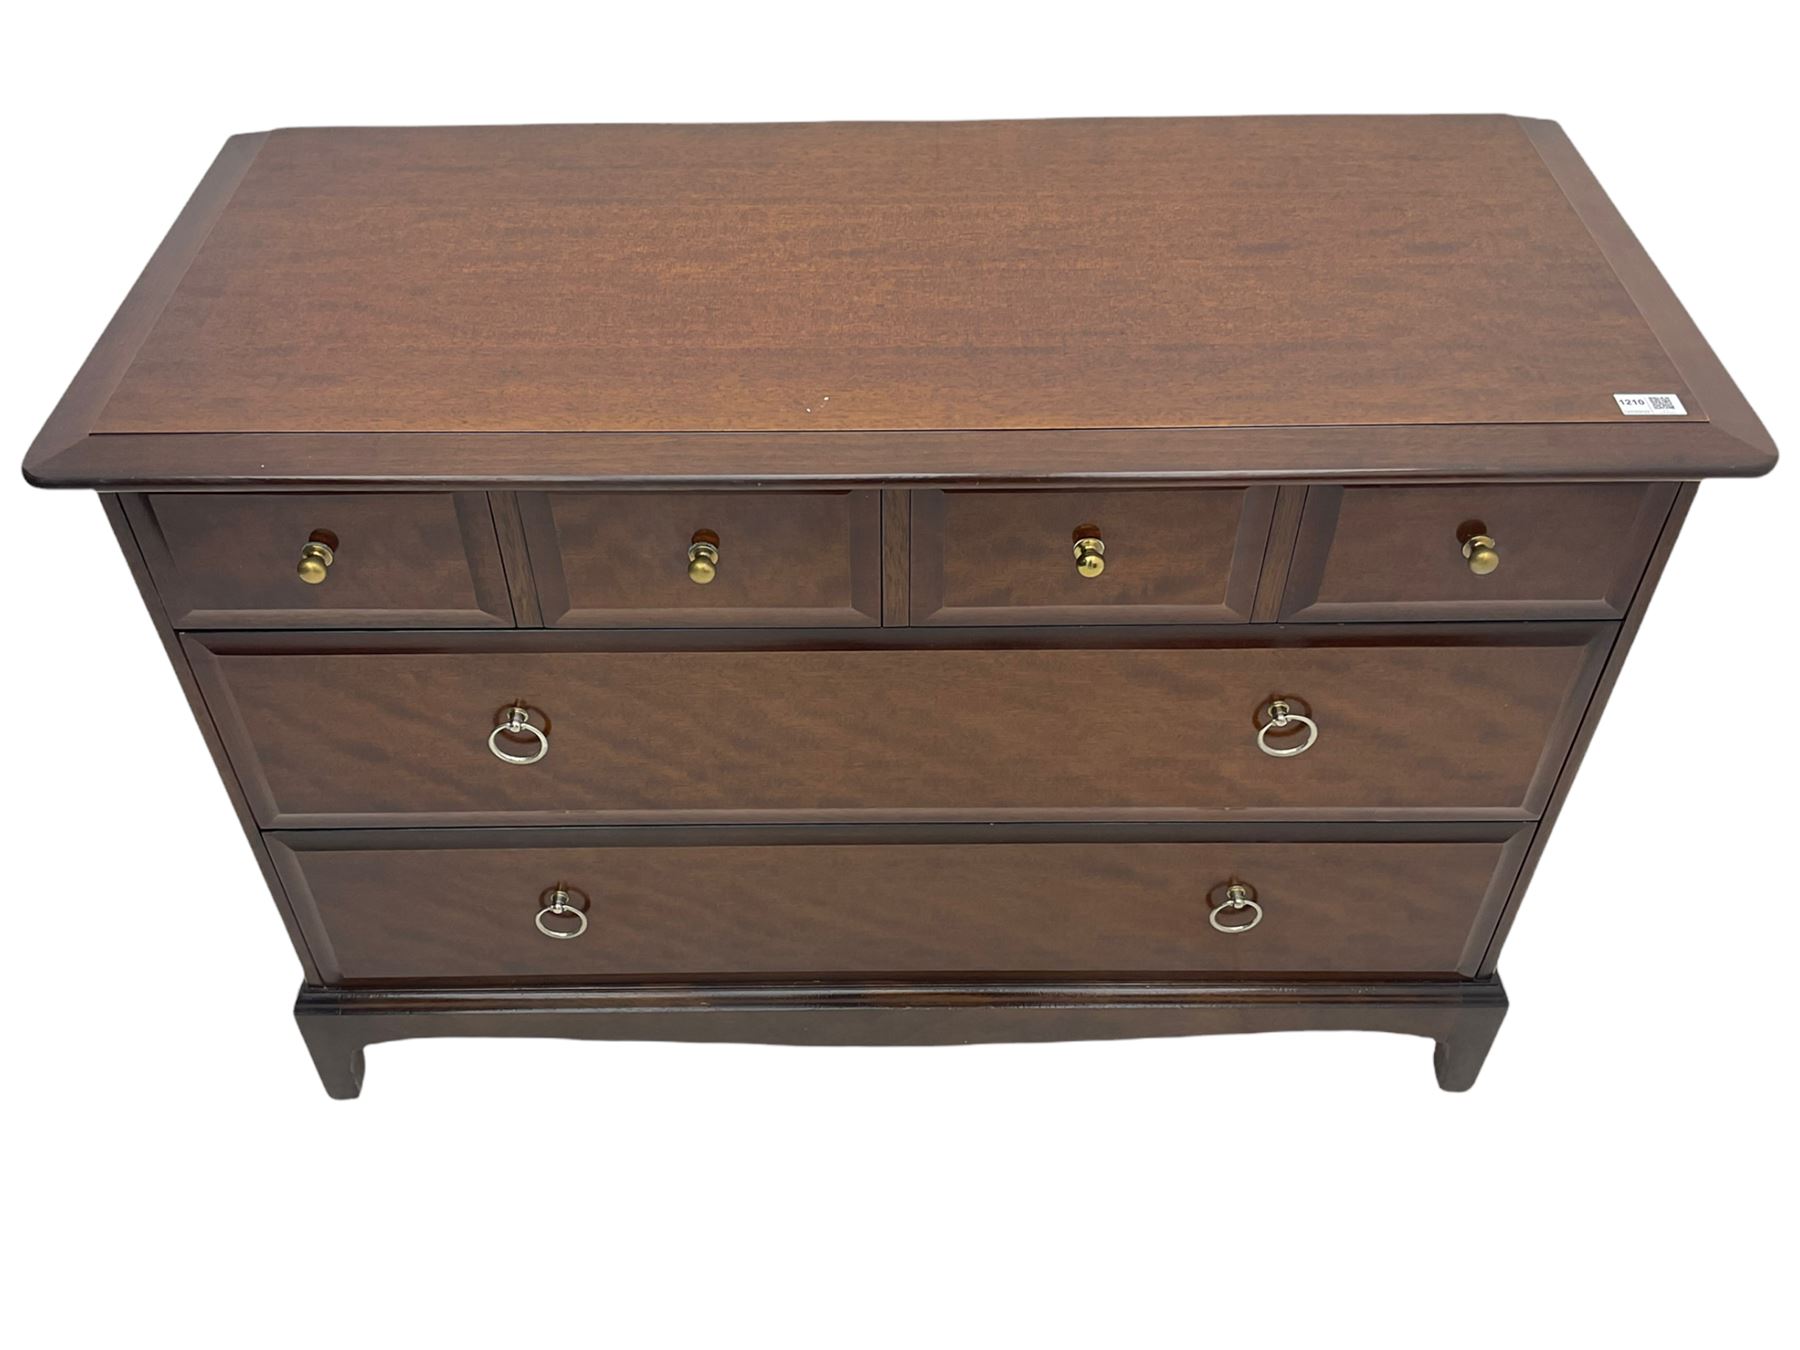 Stag Minstrel mahogany chest - Image 2 of 8